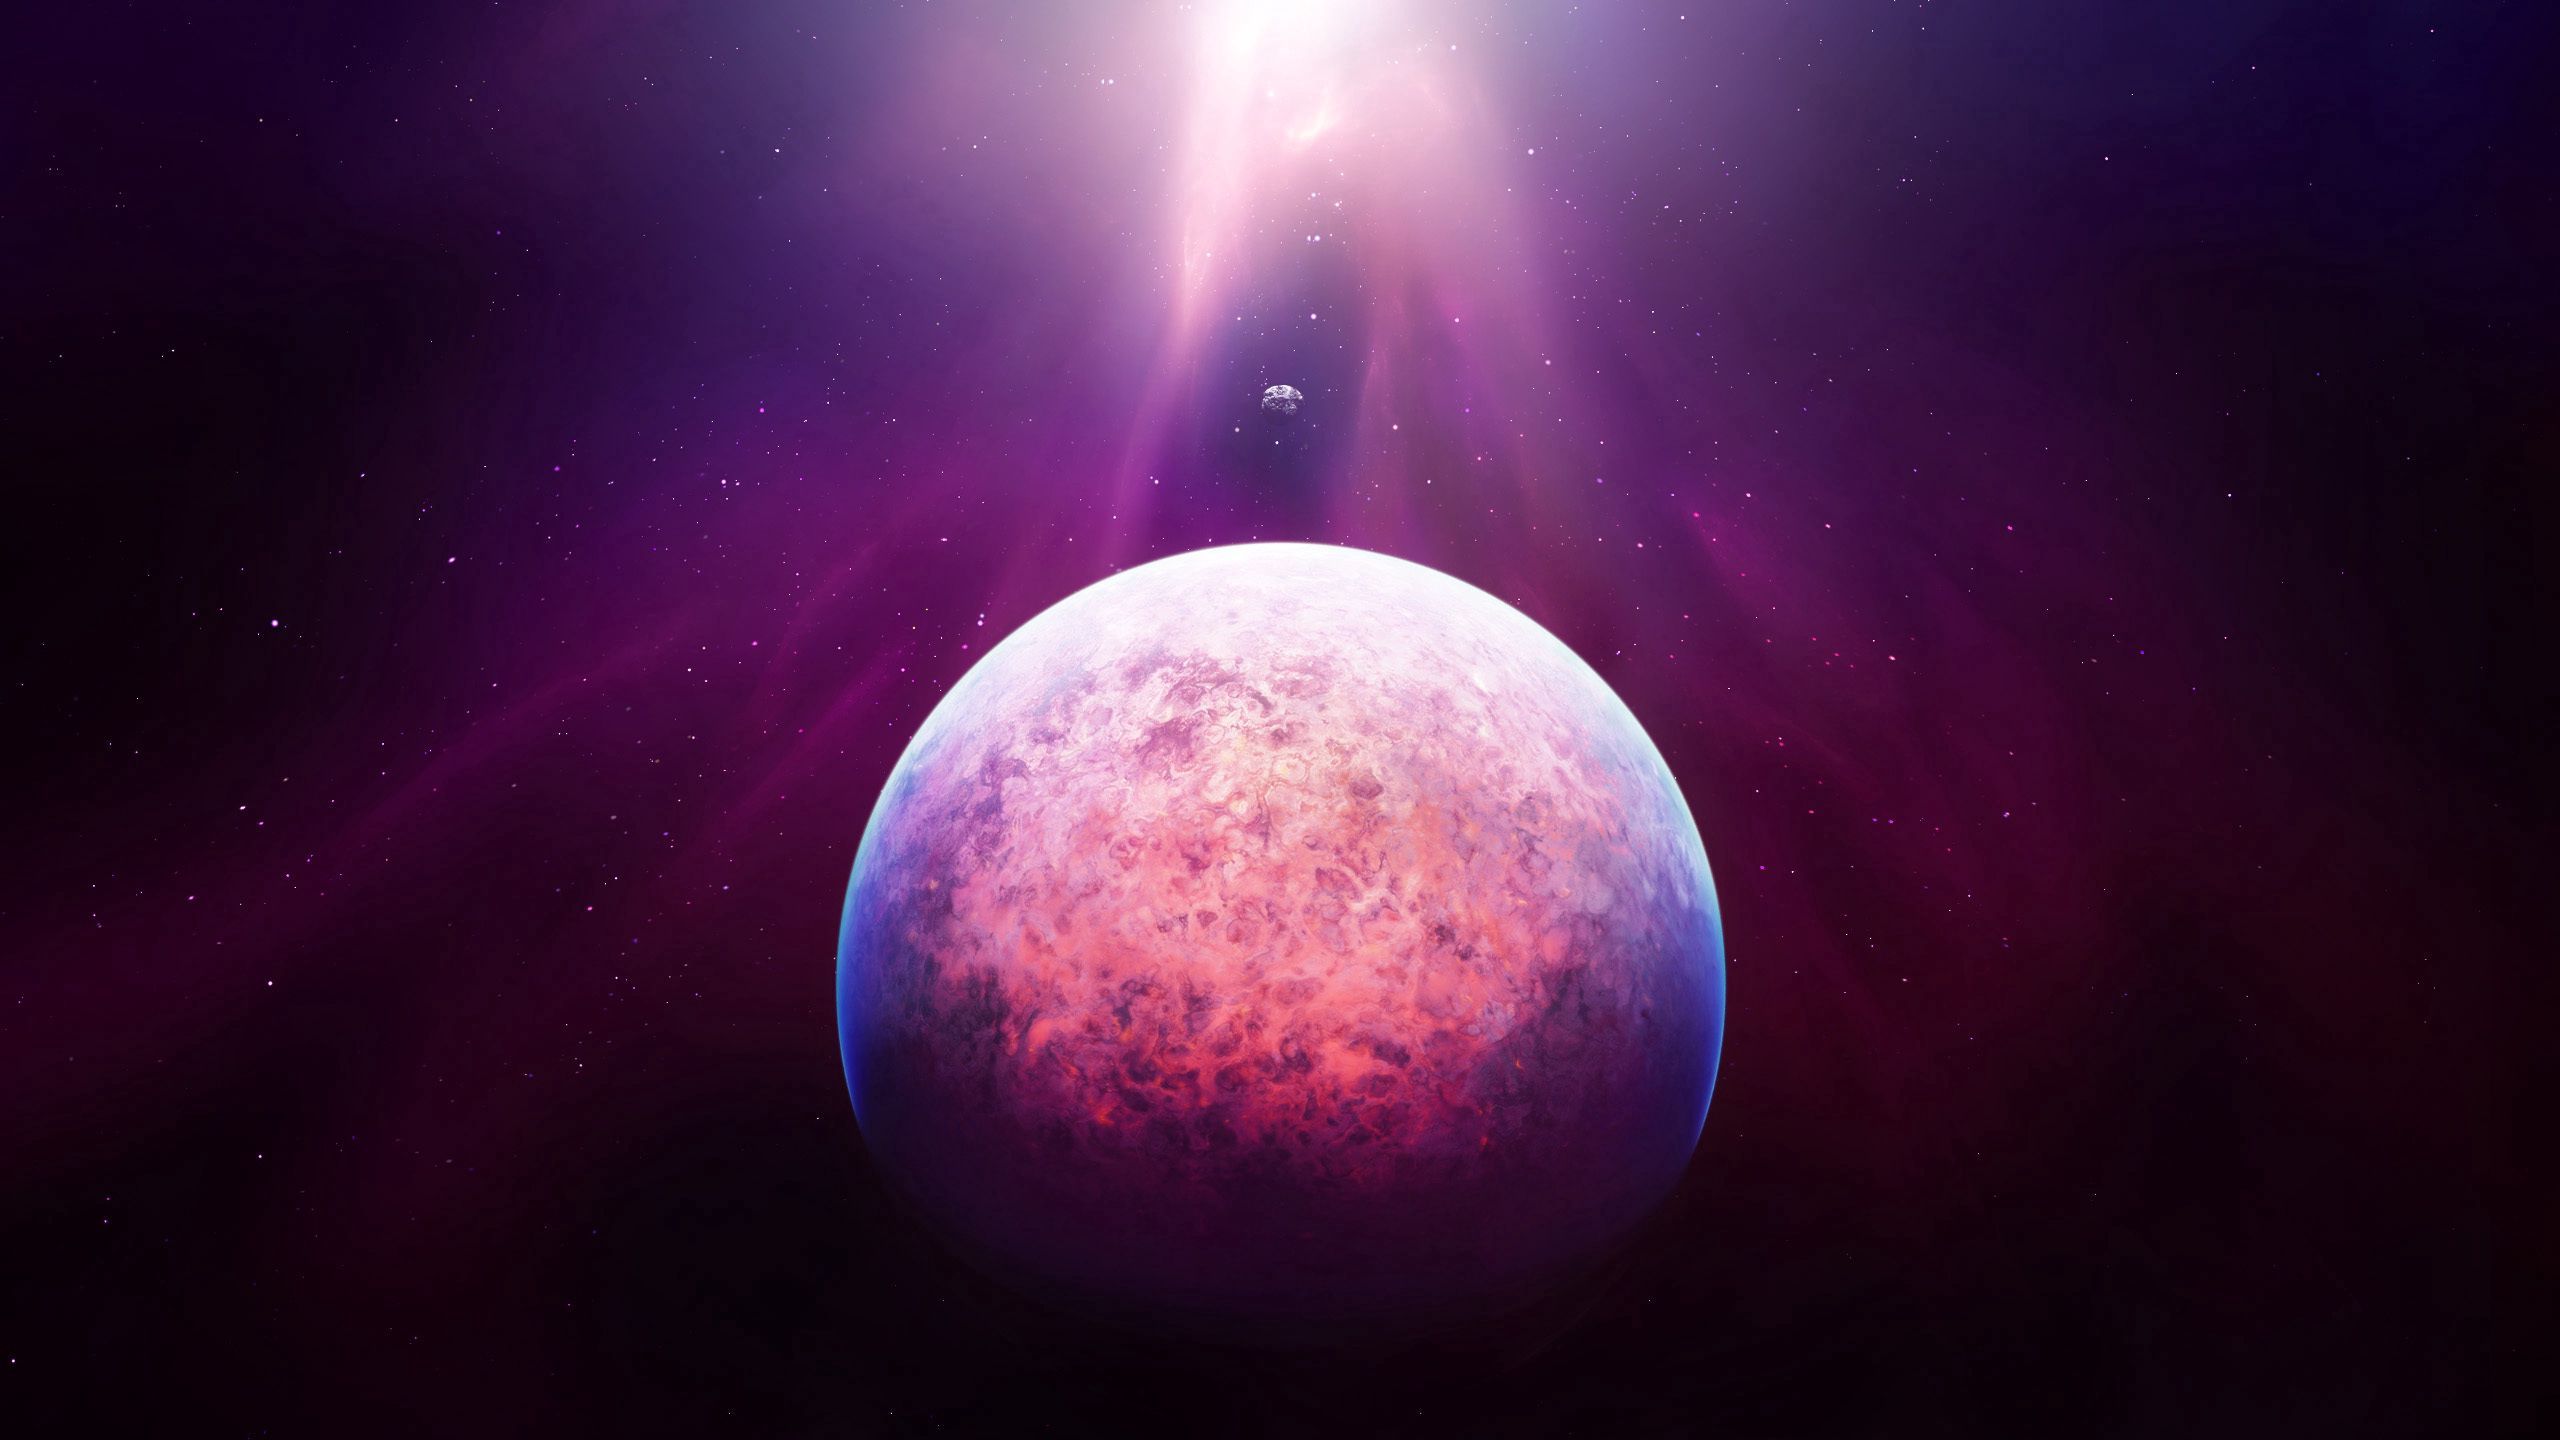 Download wallpaper 2560x1440 planet, space, glow widescreen 16:9 HD background